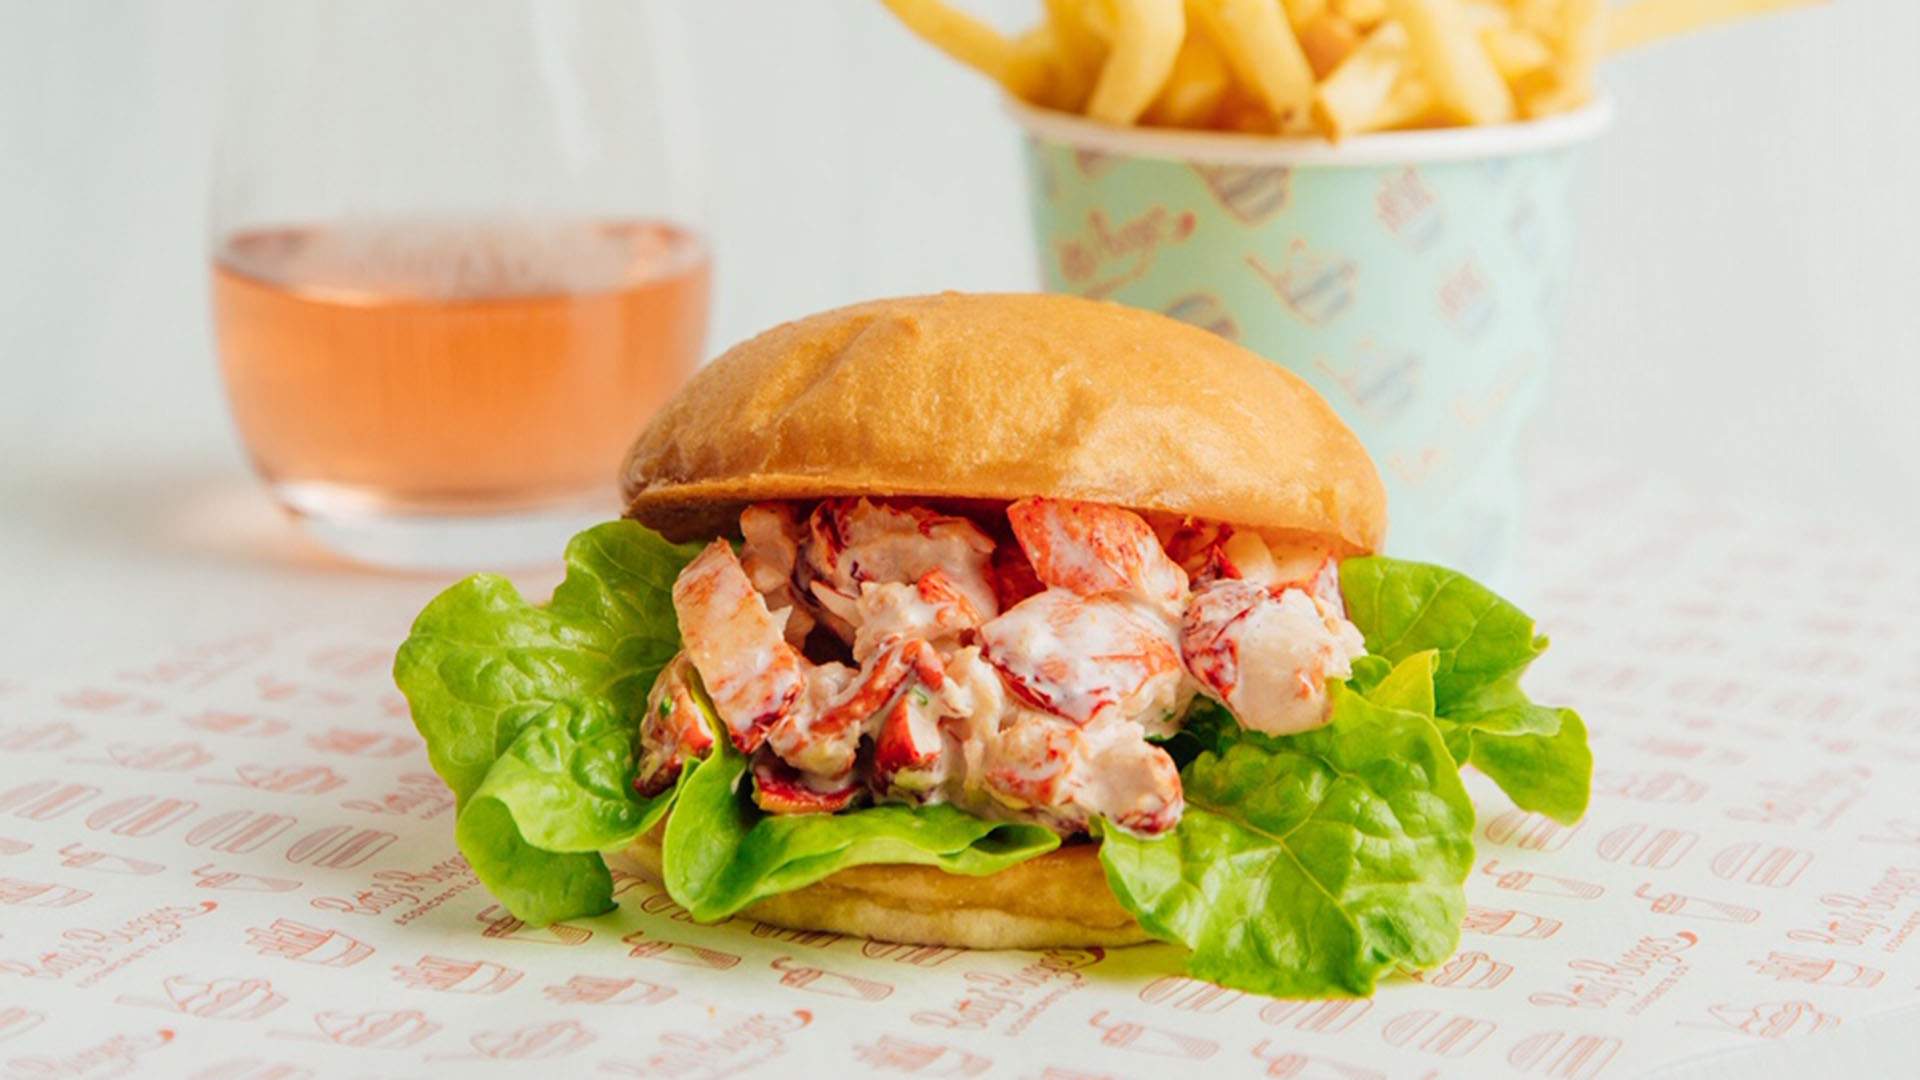 Betty's Burgers Has Added an Indulgent (But Affordable) Lobster Roll to Its Menu